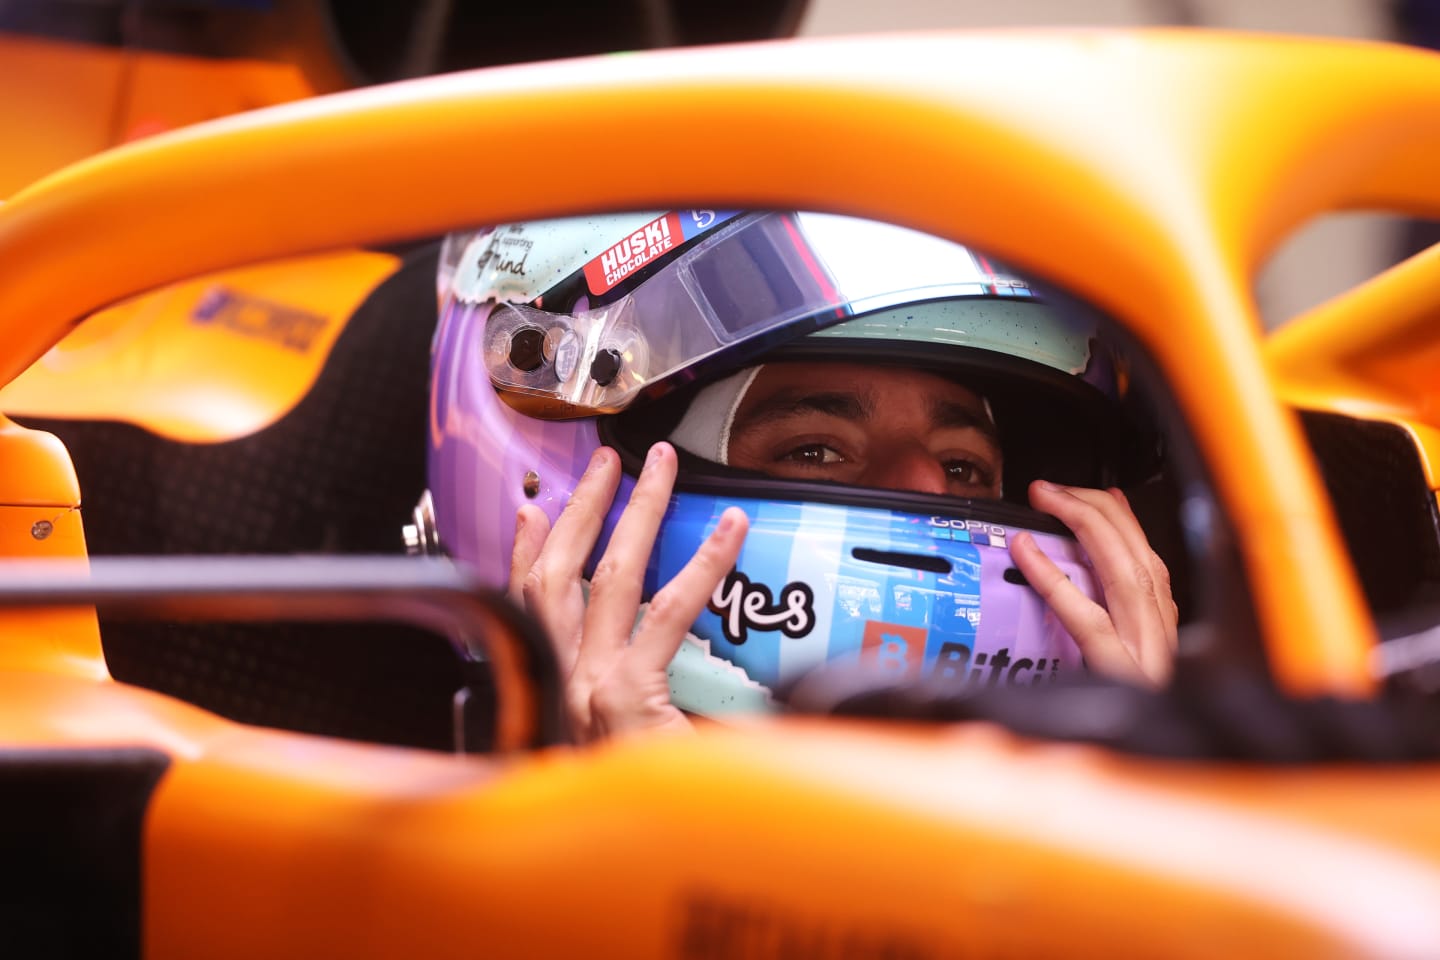 MEXICO CITY, MEXICO - NOVEMBER 05: Daniel Ricciardo of Australia and McLaren F1 prepares to drive in the garage during practice ahead of the F1 Grand Prix of Mexico at Autodromo Hermanos Rodriguez on November 05, 2021 in Mexico City, Mexico. (Photo by Lars Baron/Getty Images)